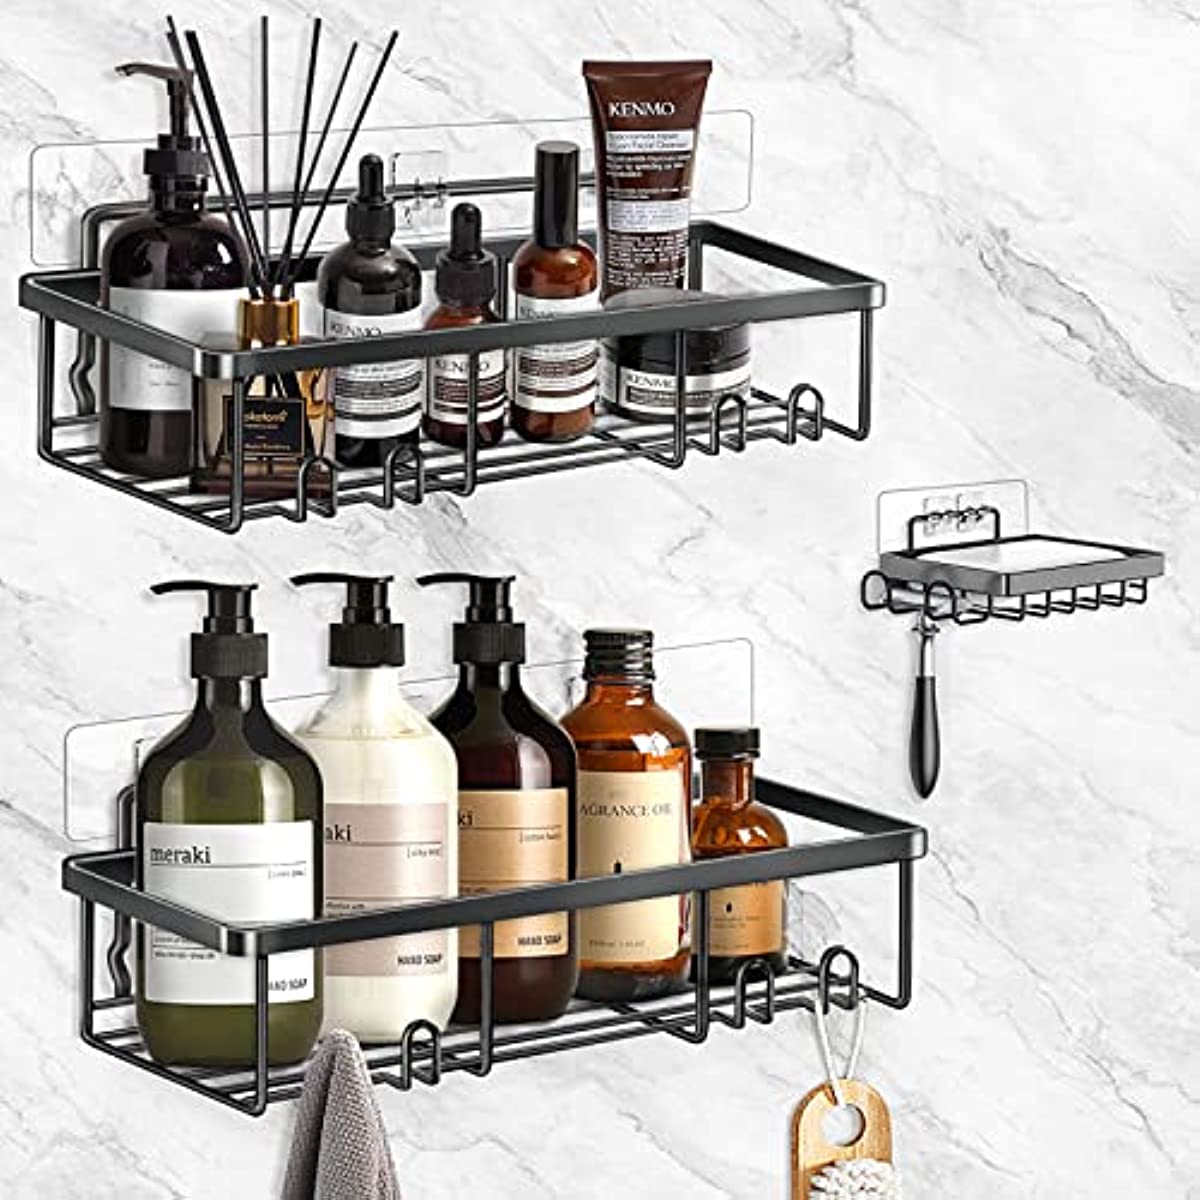 Posyla Shower Caddy, Bathroom Shower Organizers, Black Shower Shelves for  Inside Shower with Soap Caddy & Toothbrush Holder, Stainless Steel Wall  Rack